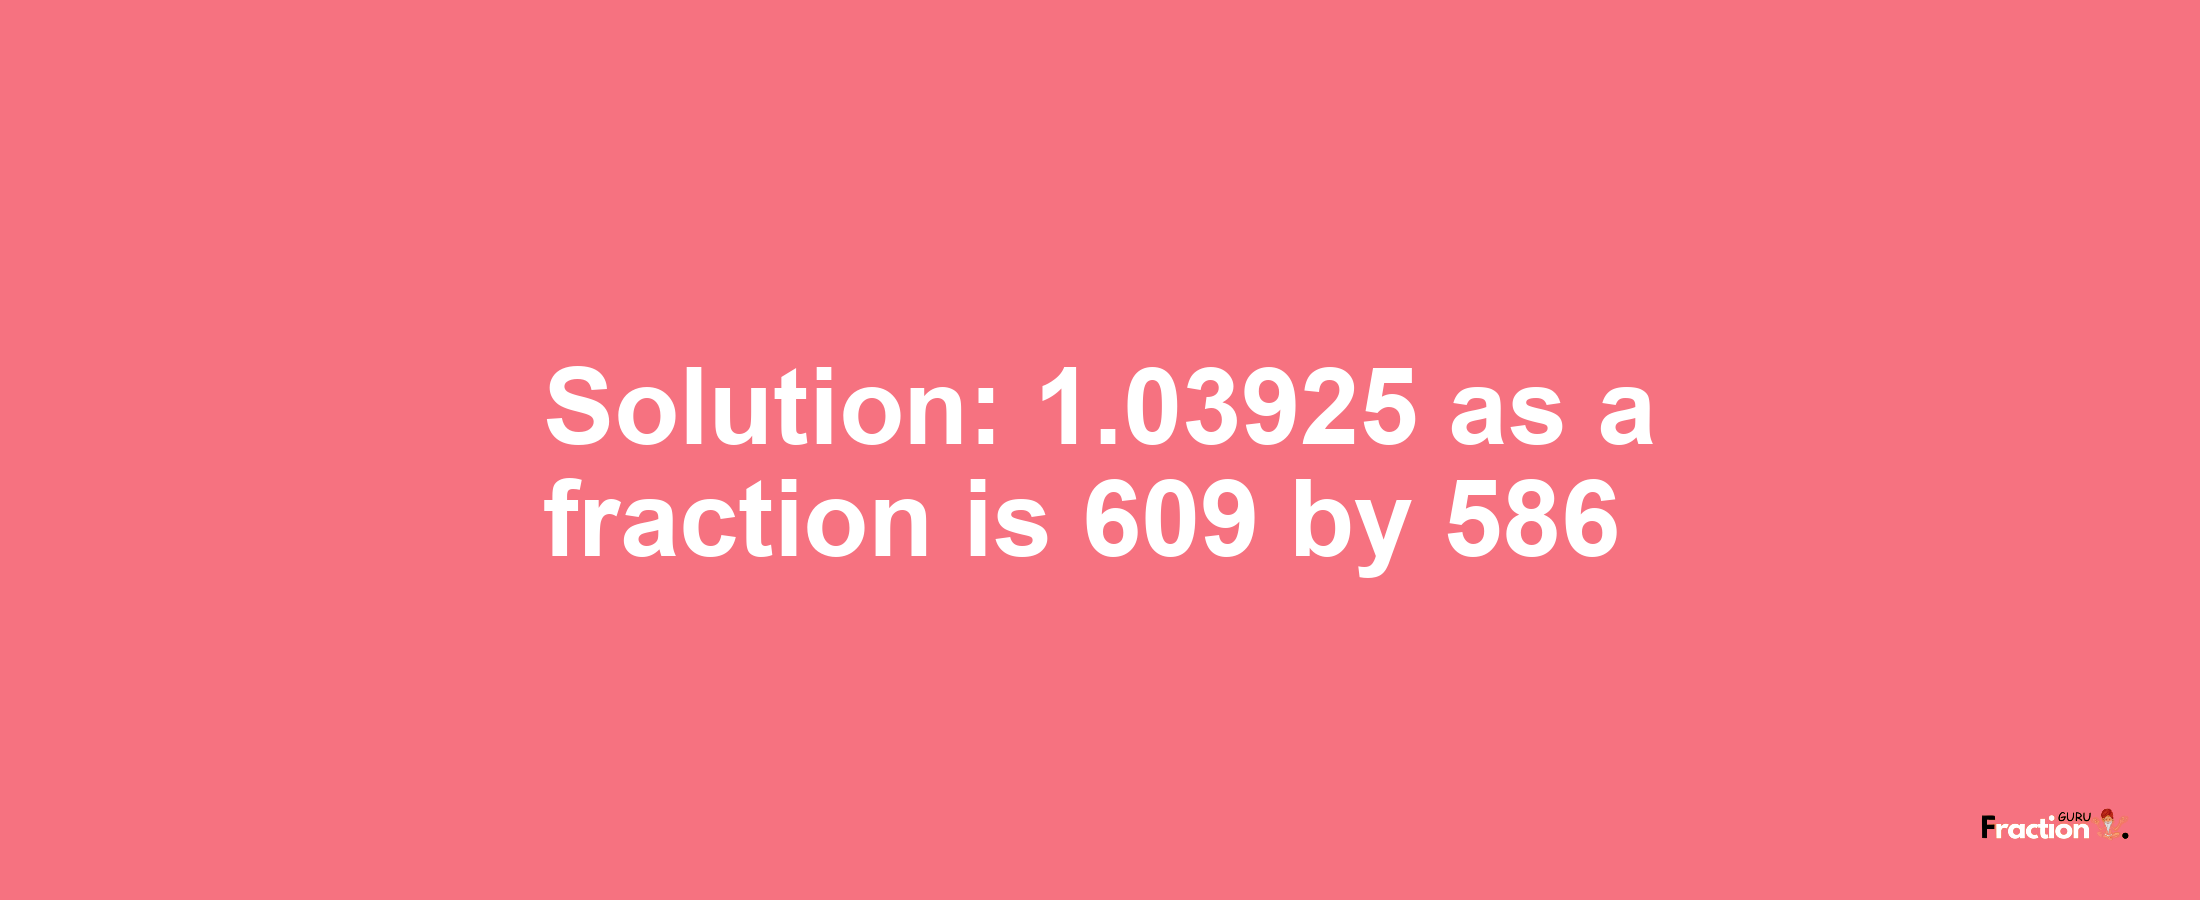 Solution:1.03925 as a fraction is 609/586